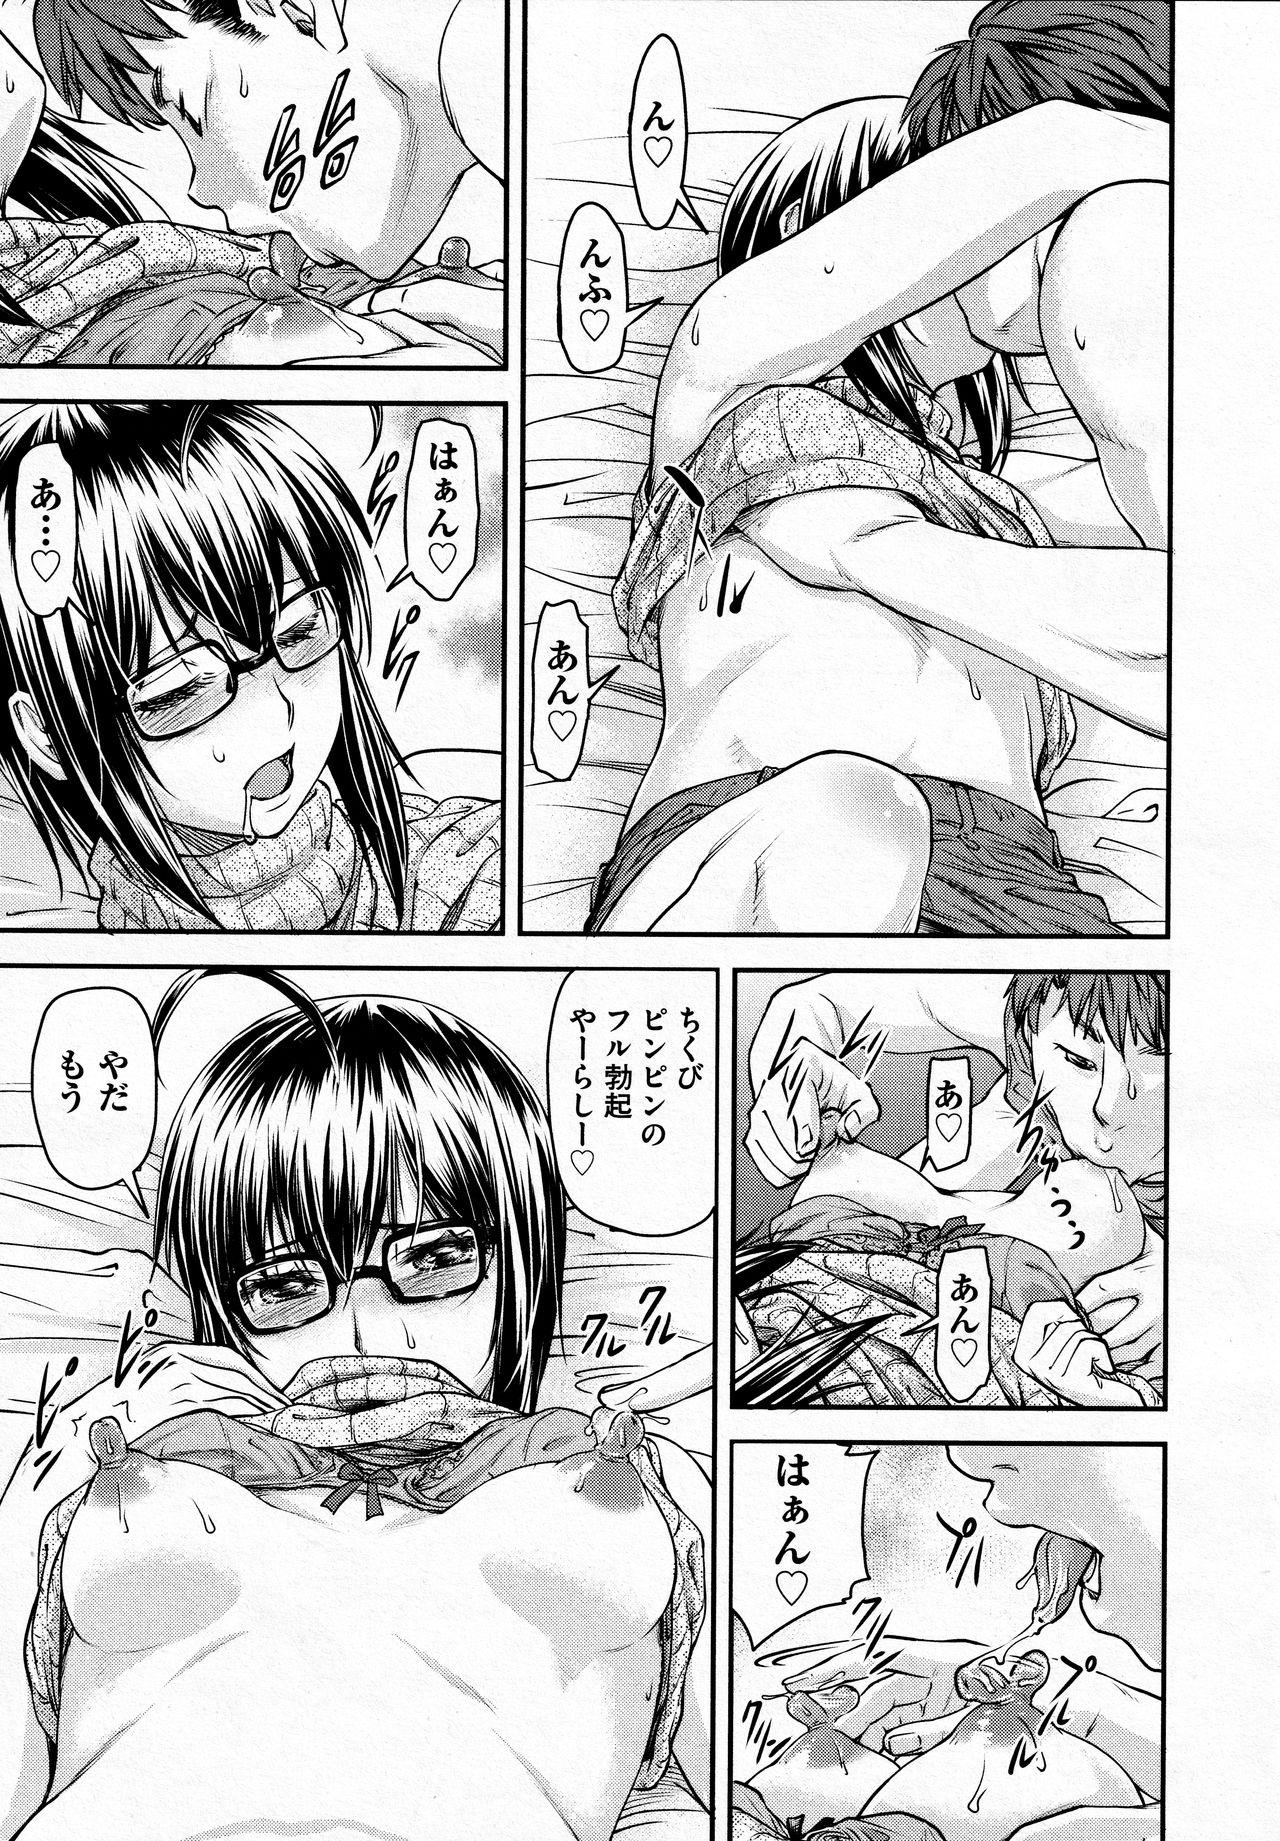 Home Kaname Date #12 Chacal - Page 7